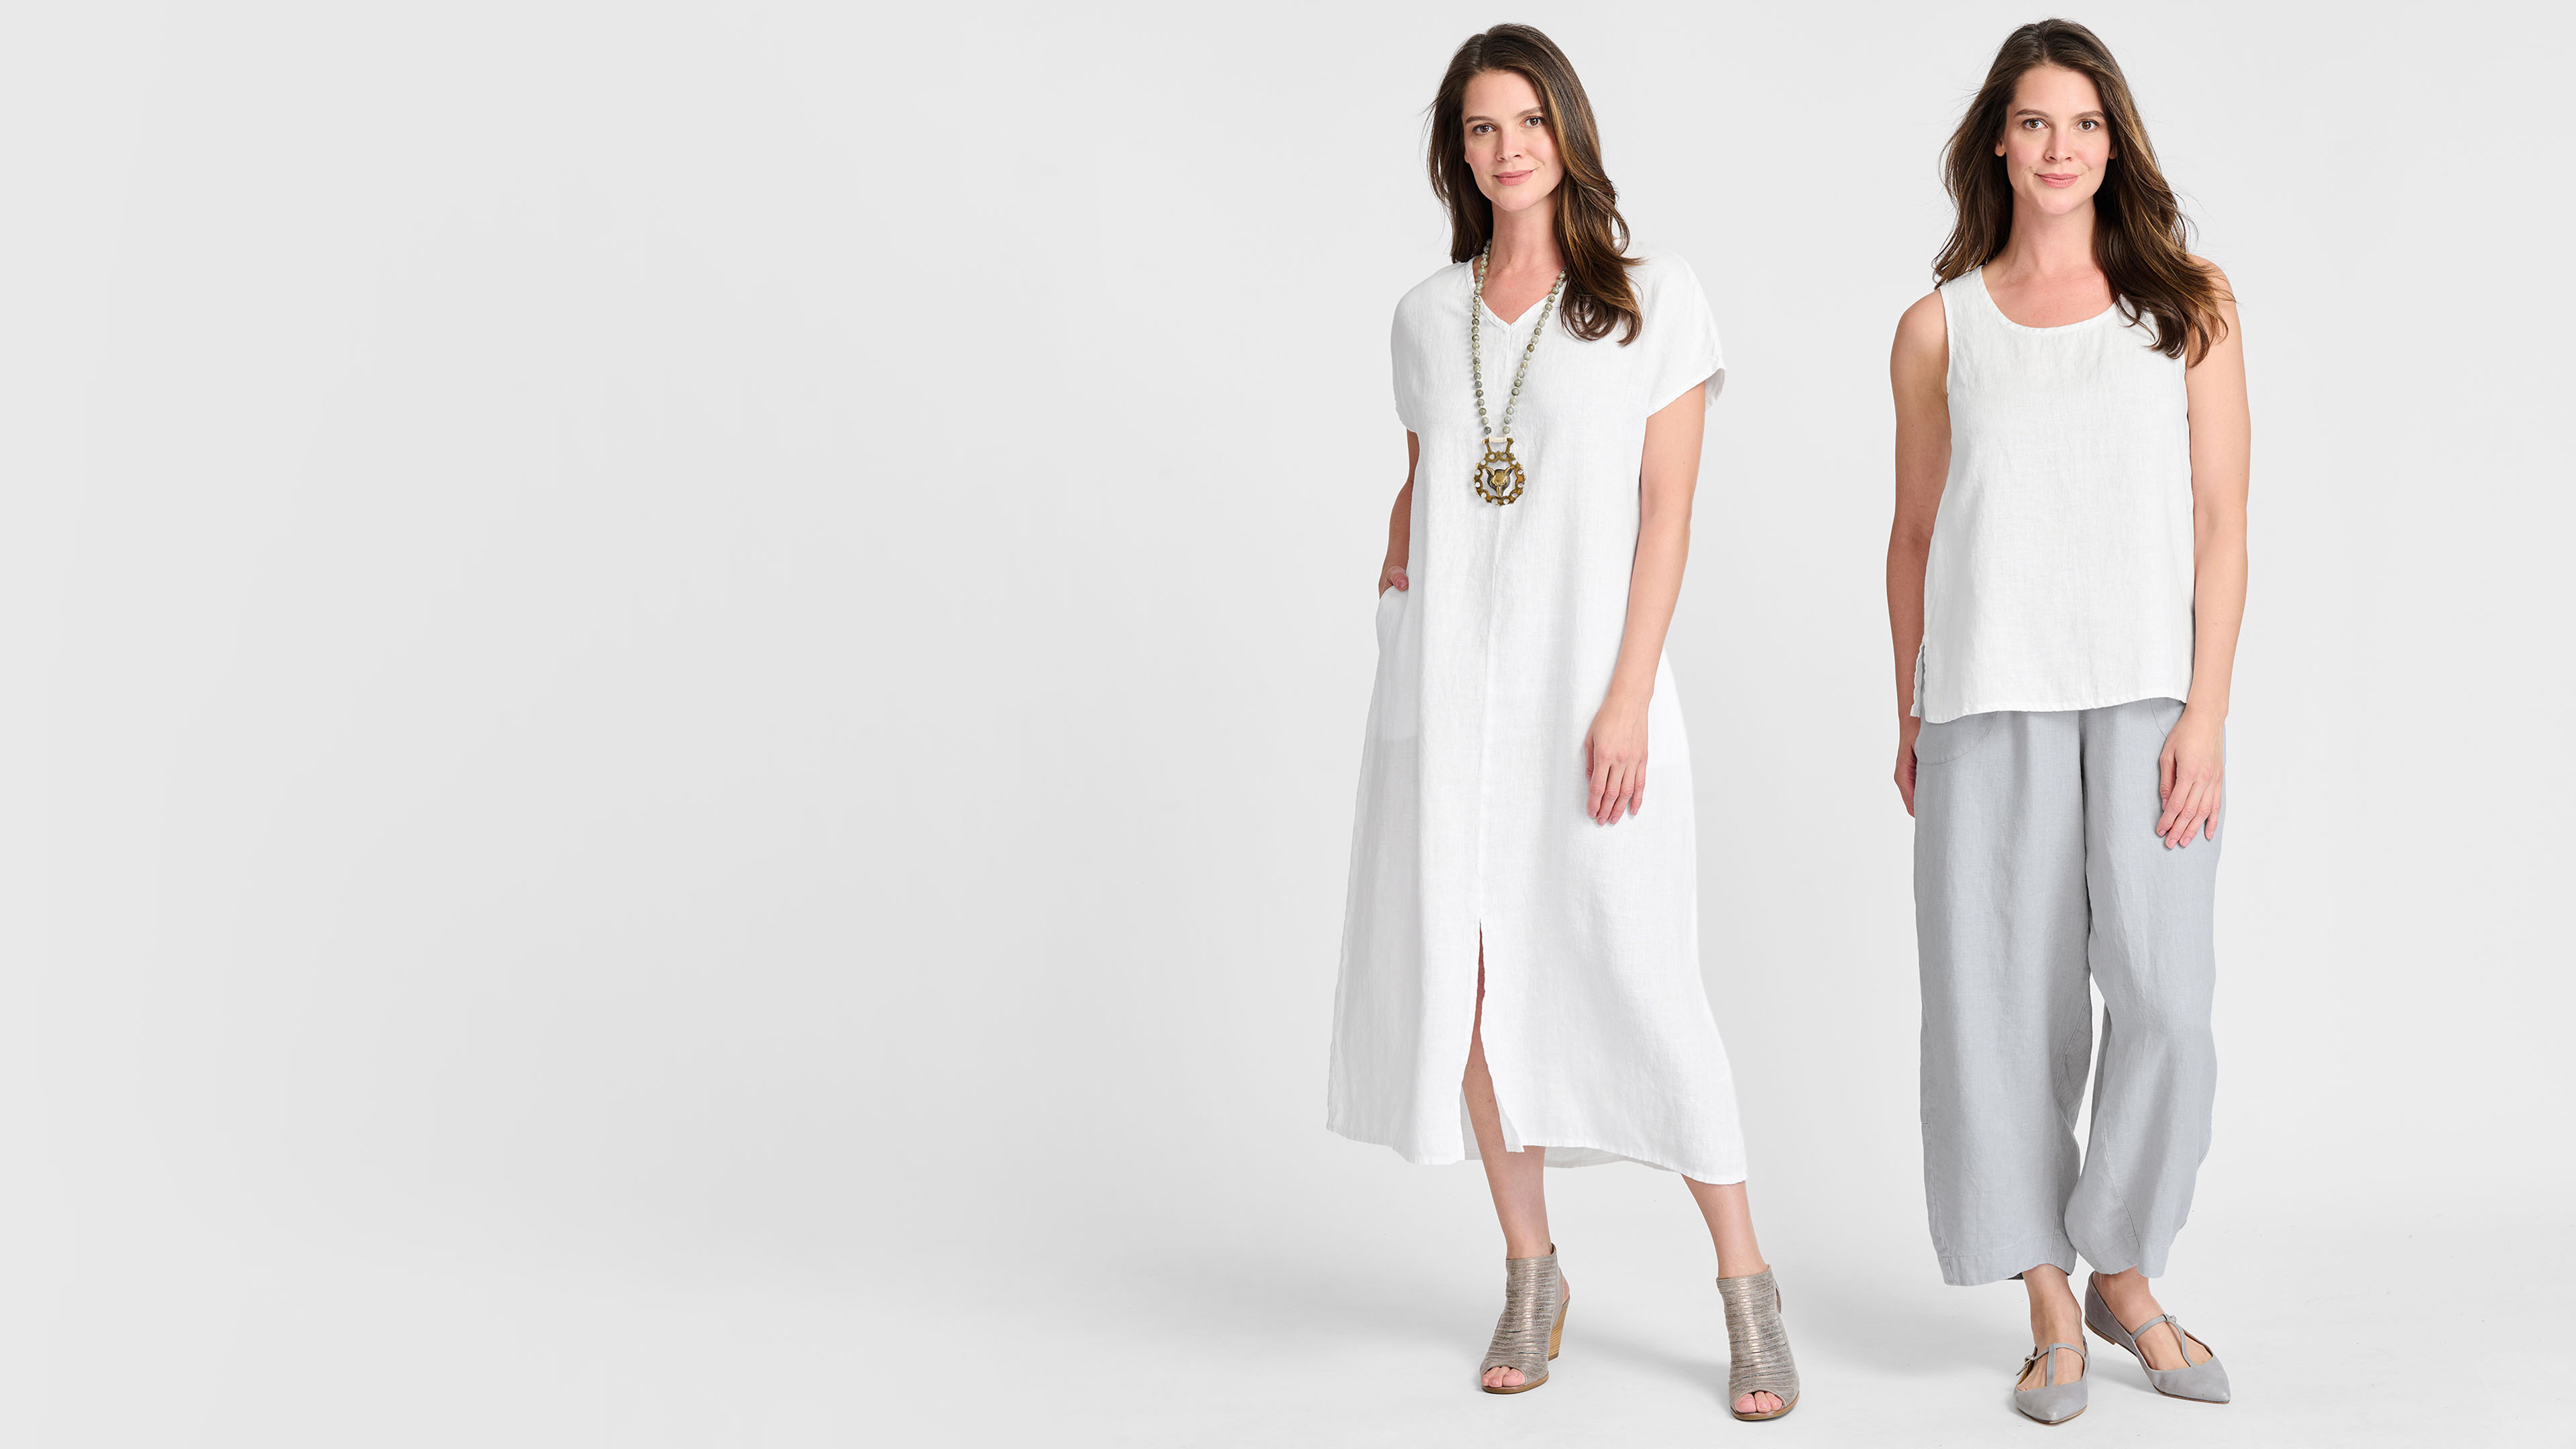 Core 2023 - FLAX women's linen clothing collection.